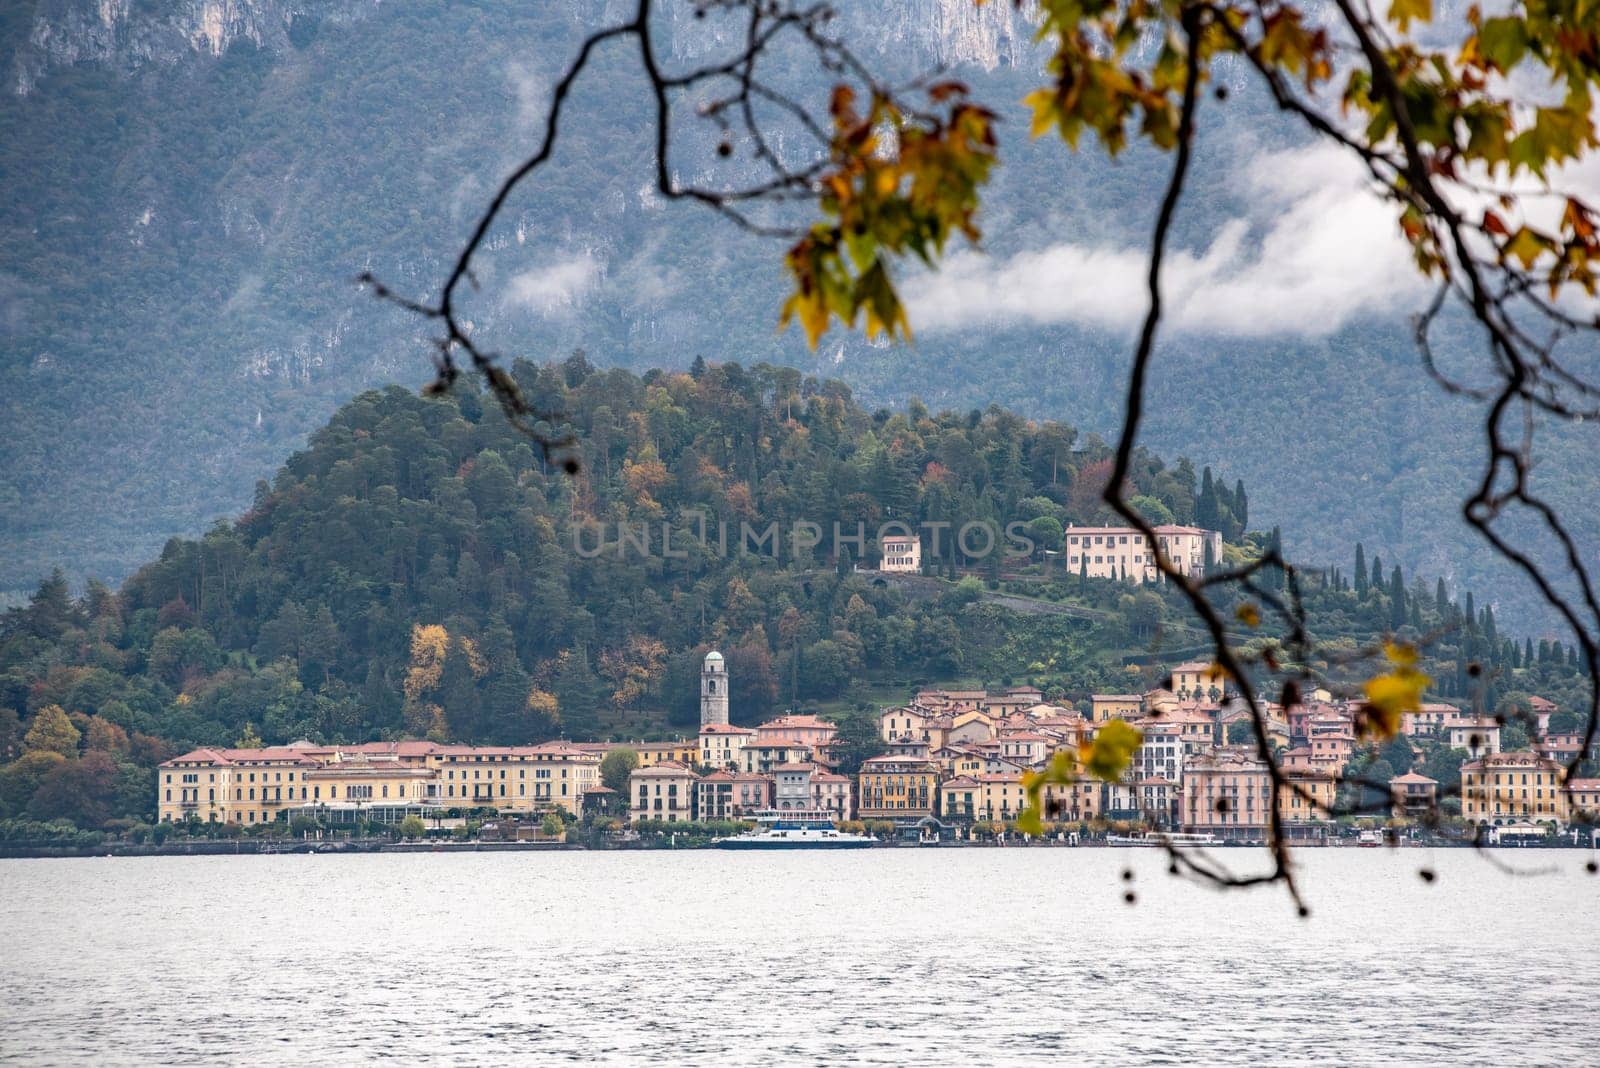 Bellagio at lake Como after rain, seen from Tremezzo by imagoDens